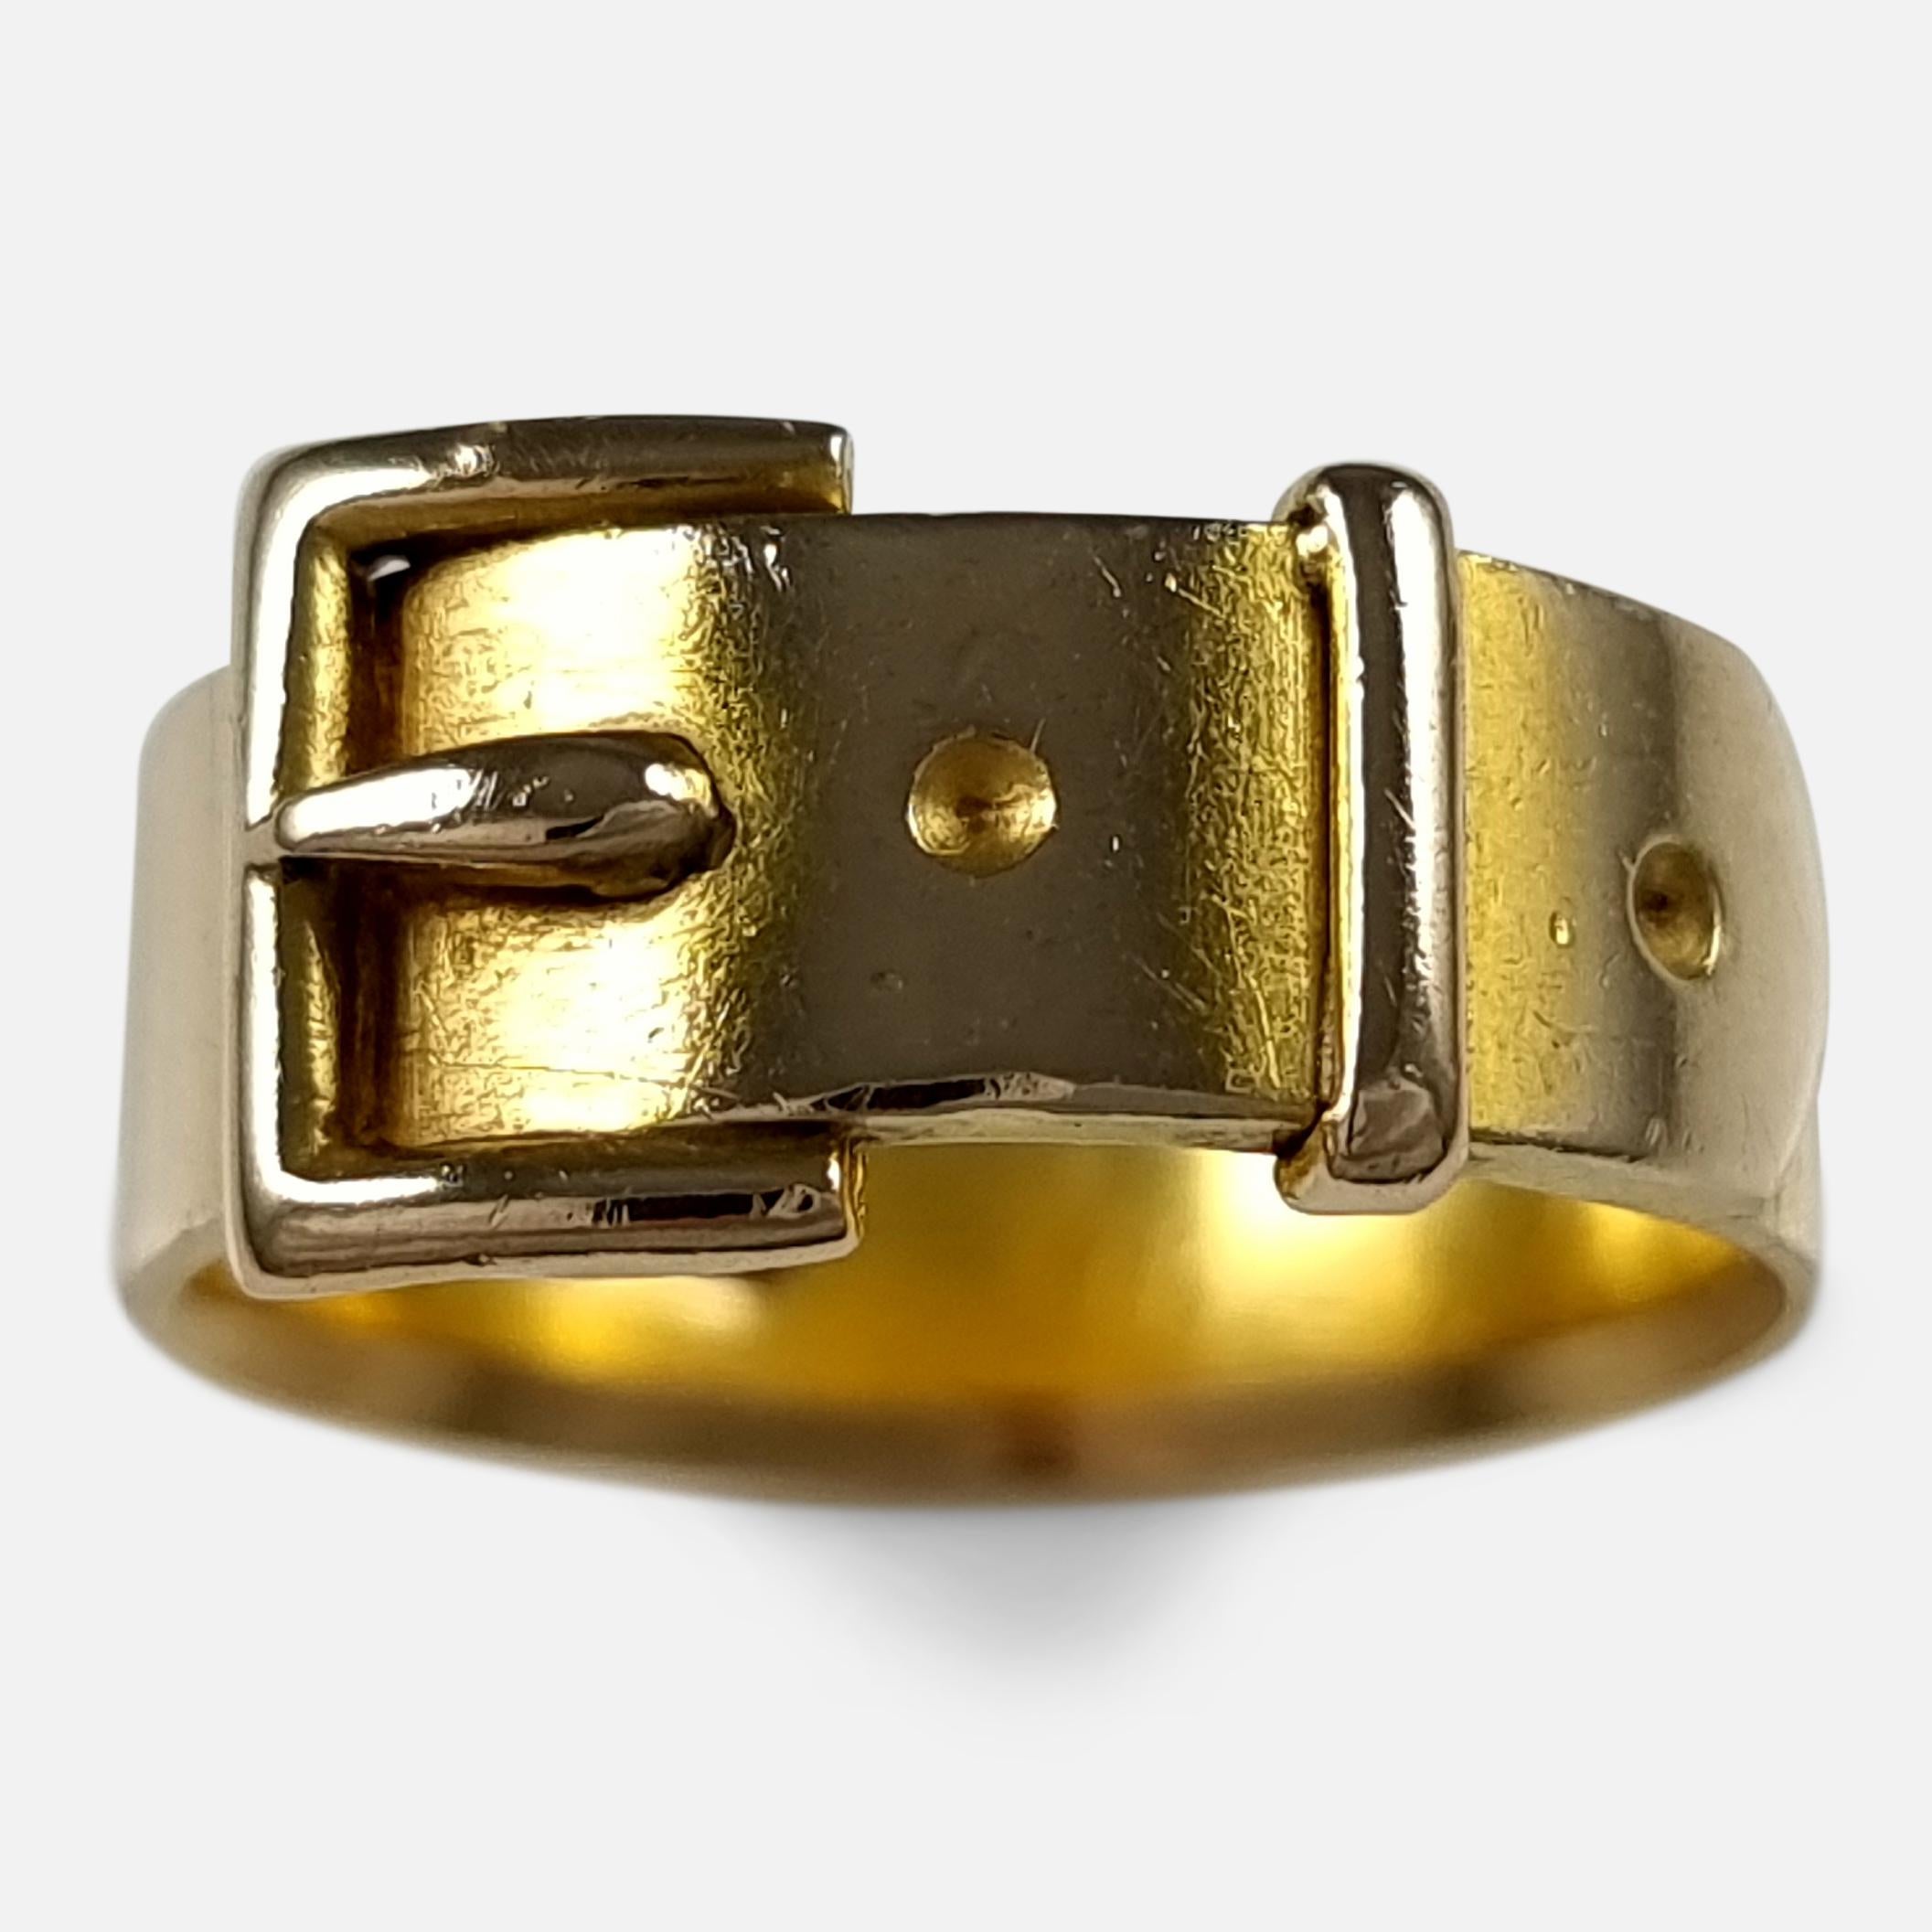 A Victorian 18ct yellow gold buckle ring.

The ring is hallmarked with Birmingham assay marks, stamped '18' to denote 18ct gold, and date stamp 'P' for 1889.

Period: - Late 19th Century.

Date: - 1889.

Engraving: - The ring is